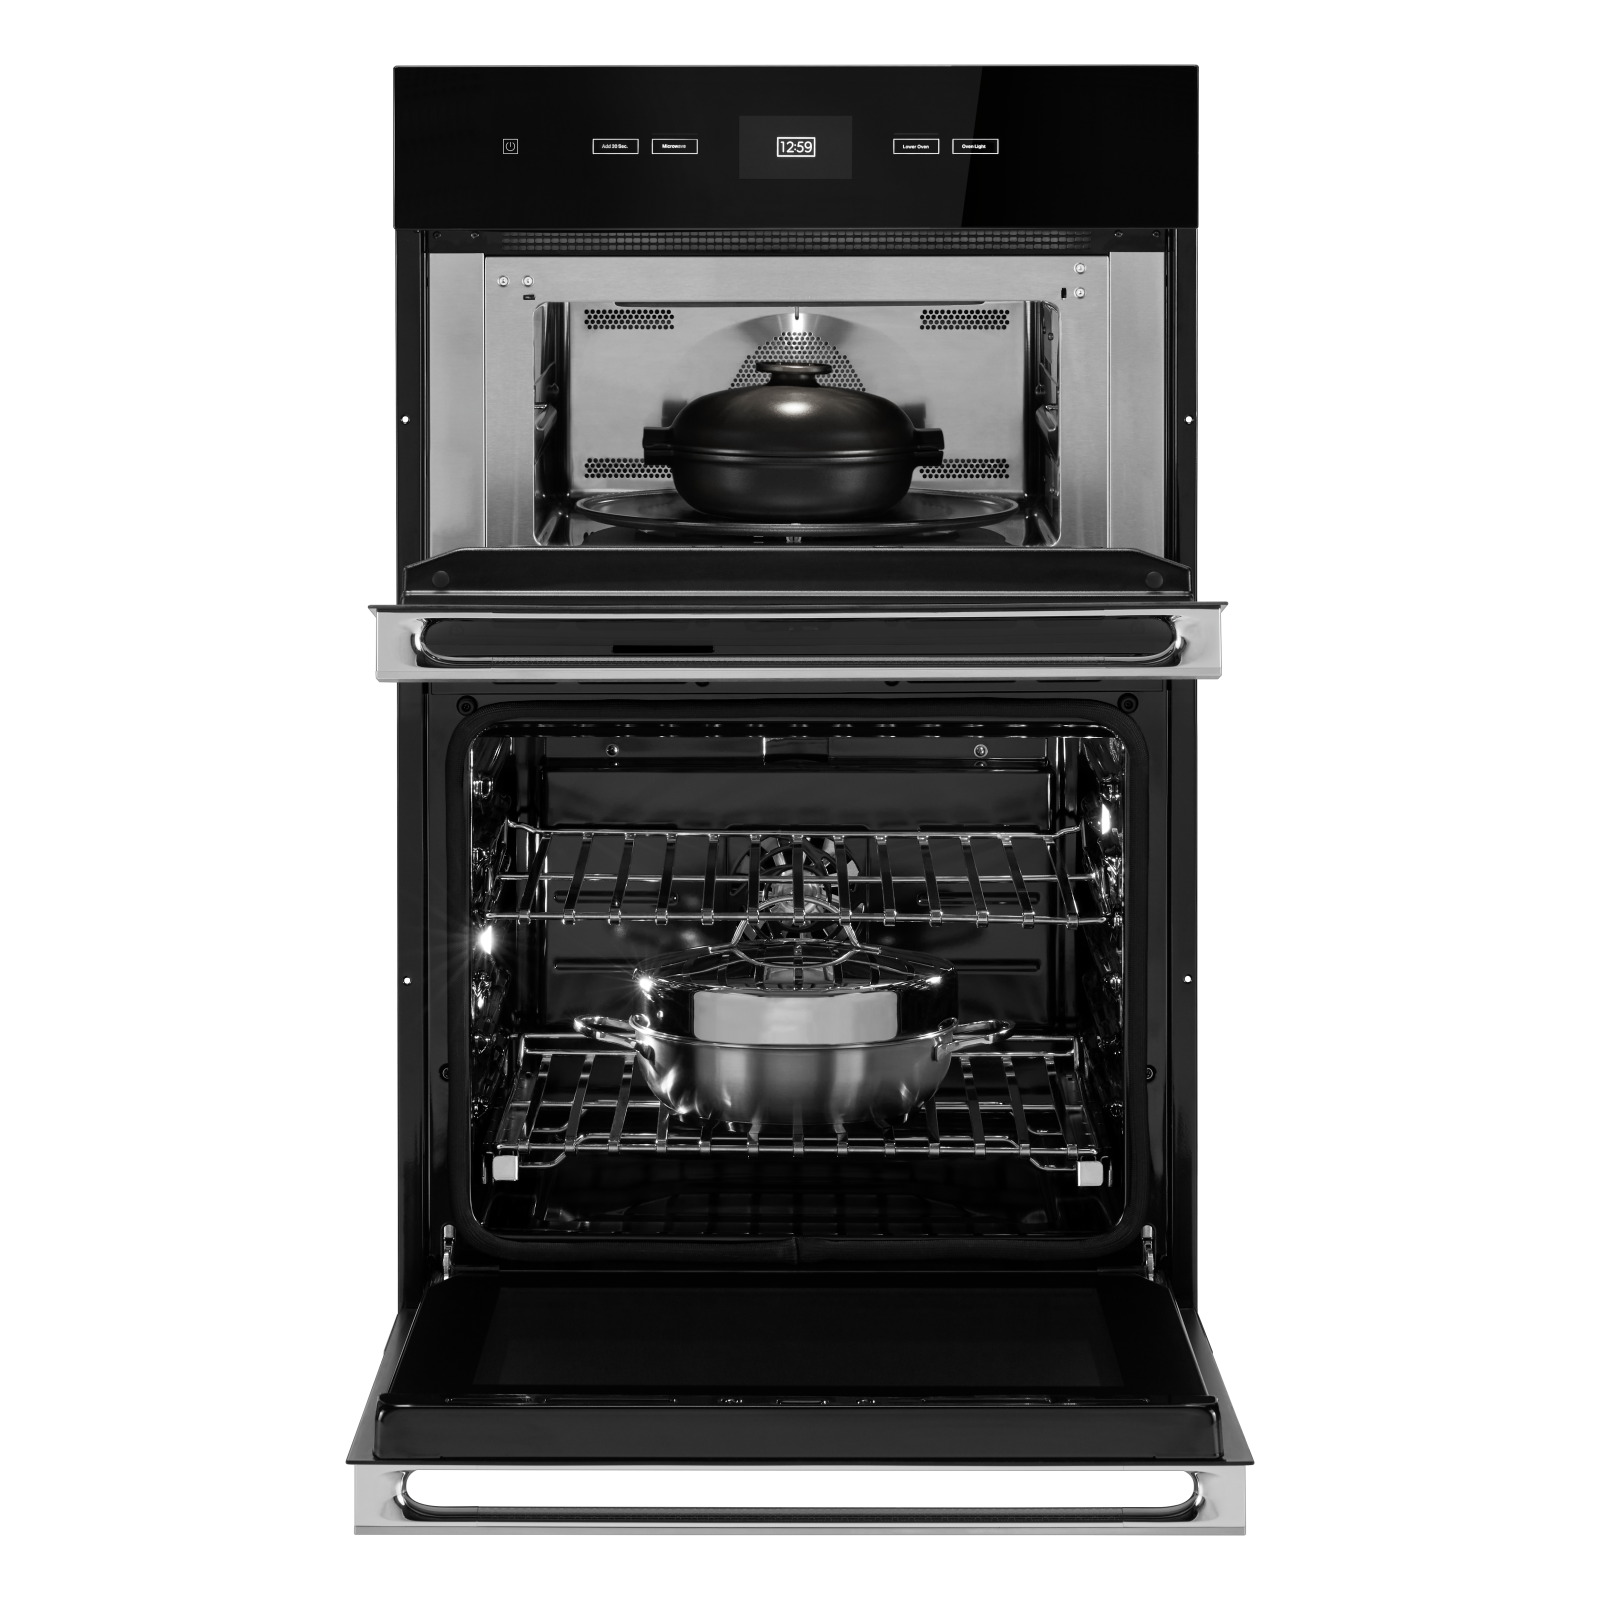 JennAir - 5.7 cu. ft Combination Wall Oven in Black - JMW2427LM